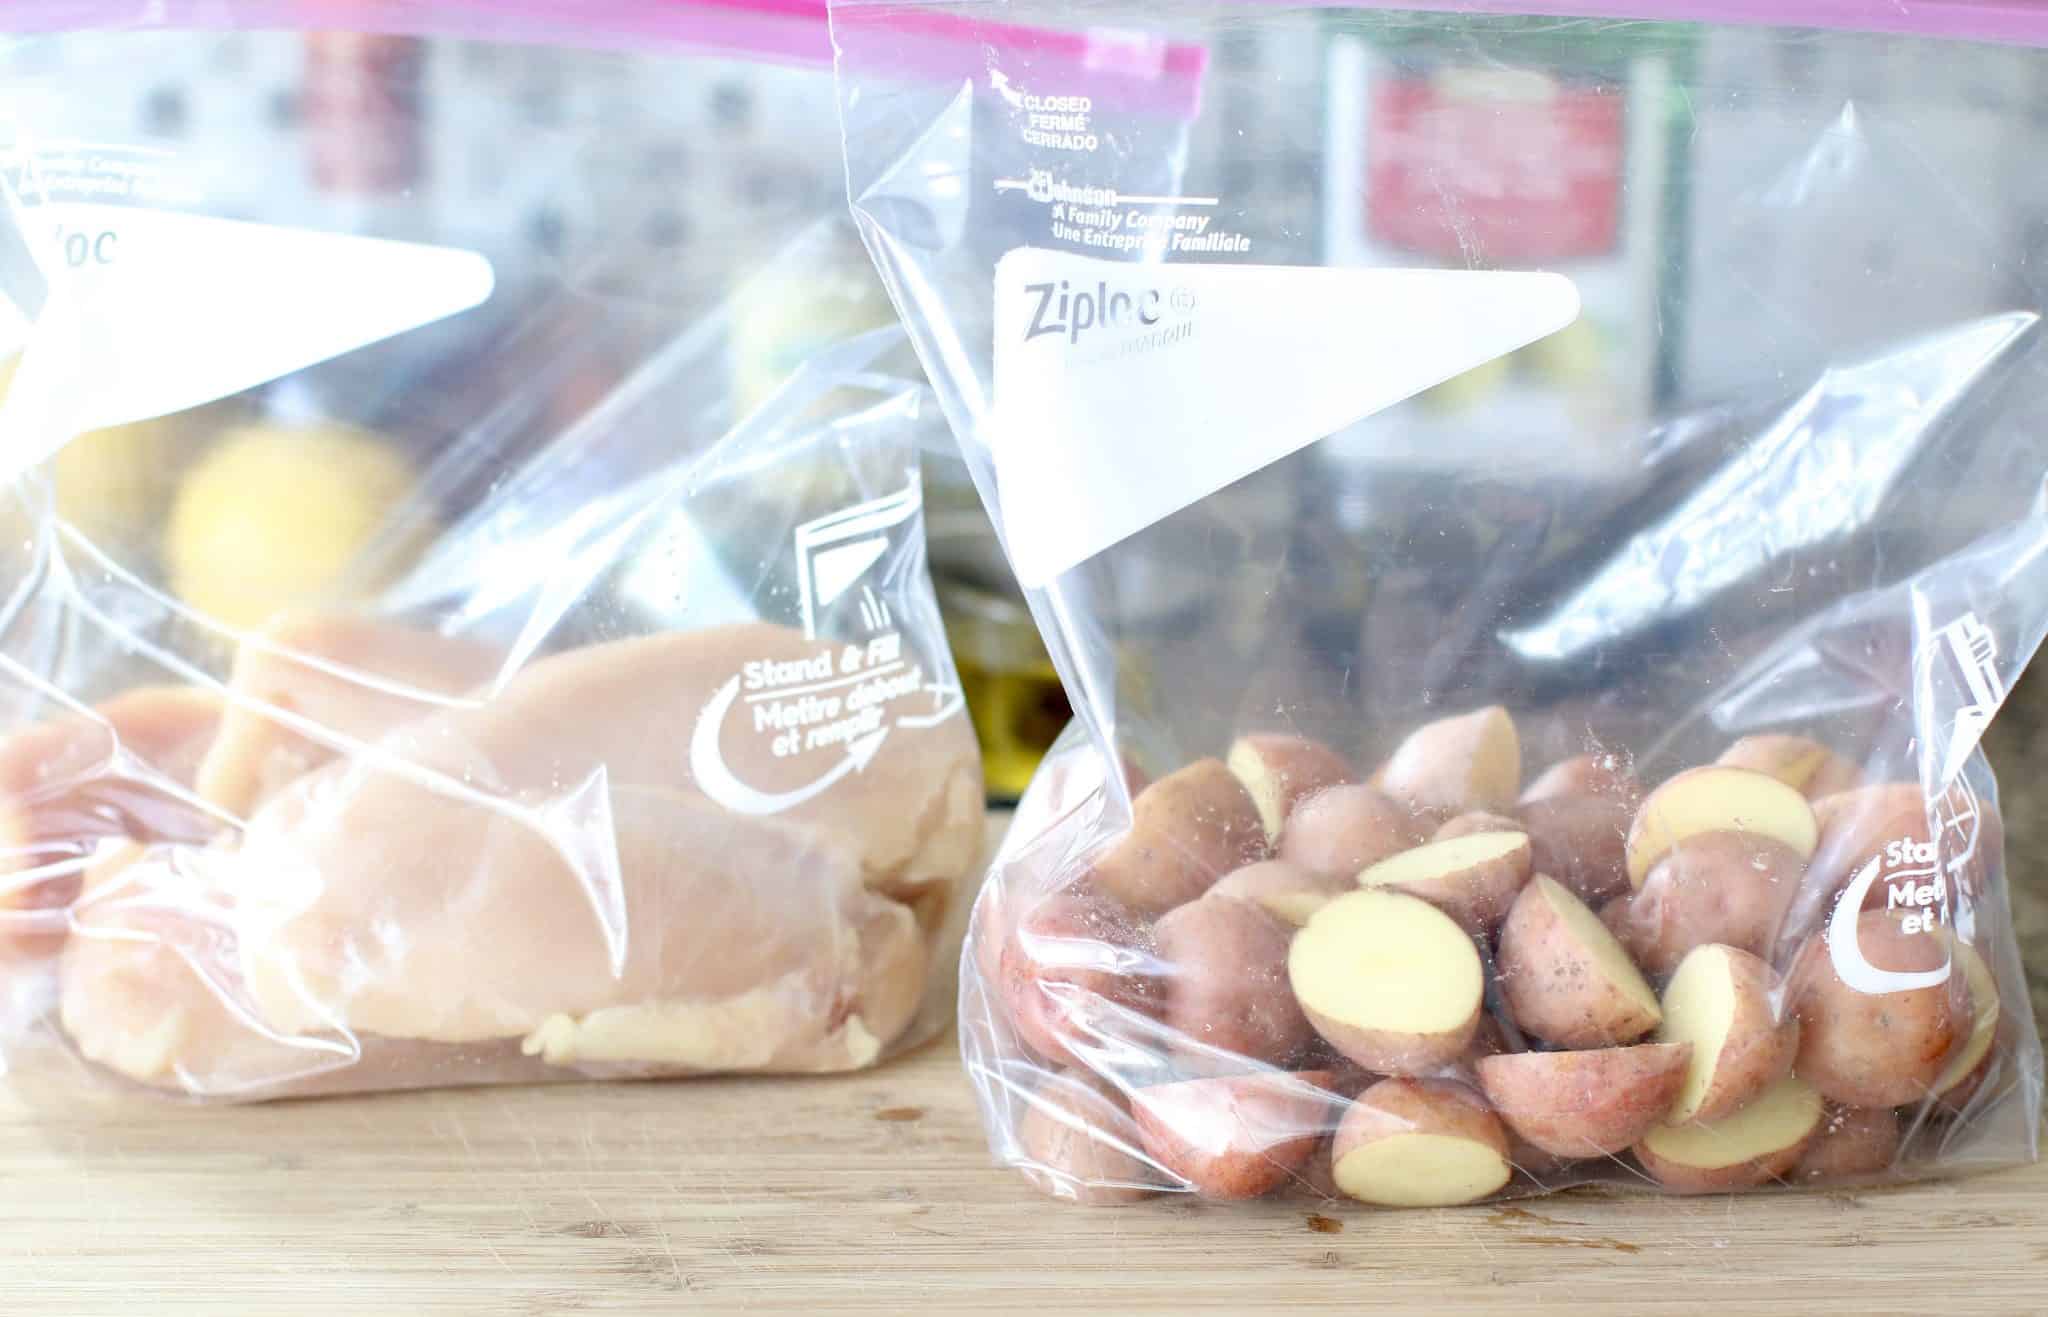 chicken breasts shown in a zip top bag and sliced red potatoes shown in another zip top bag